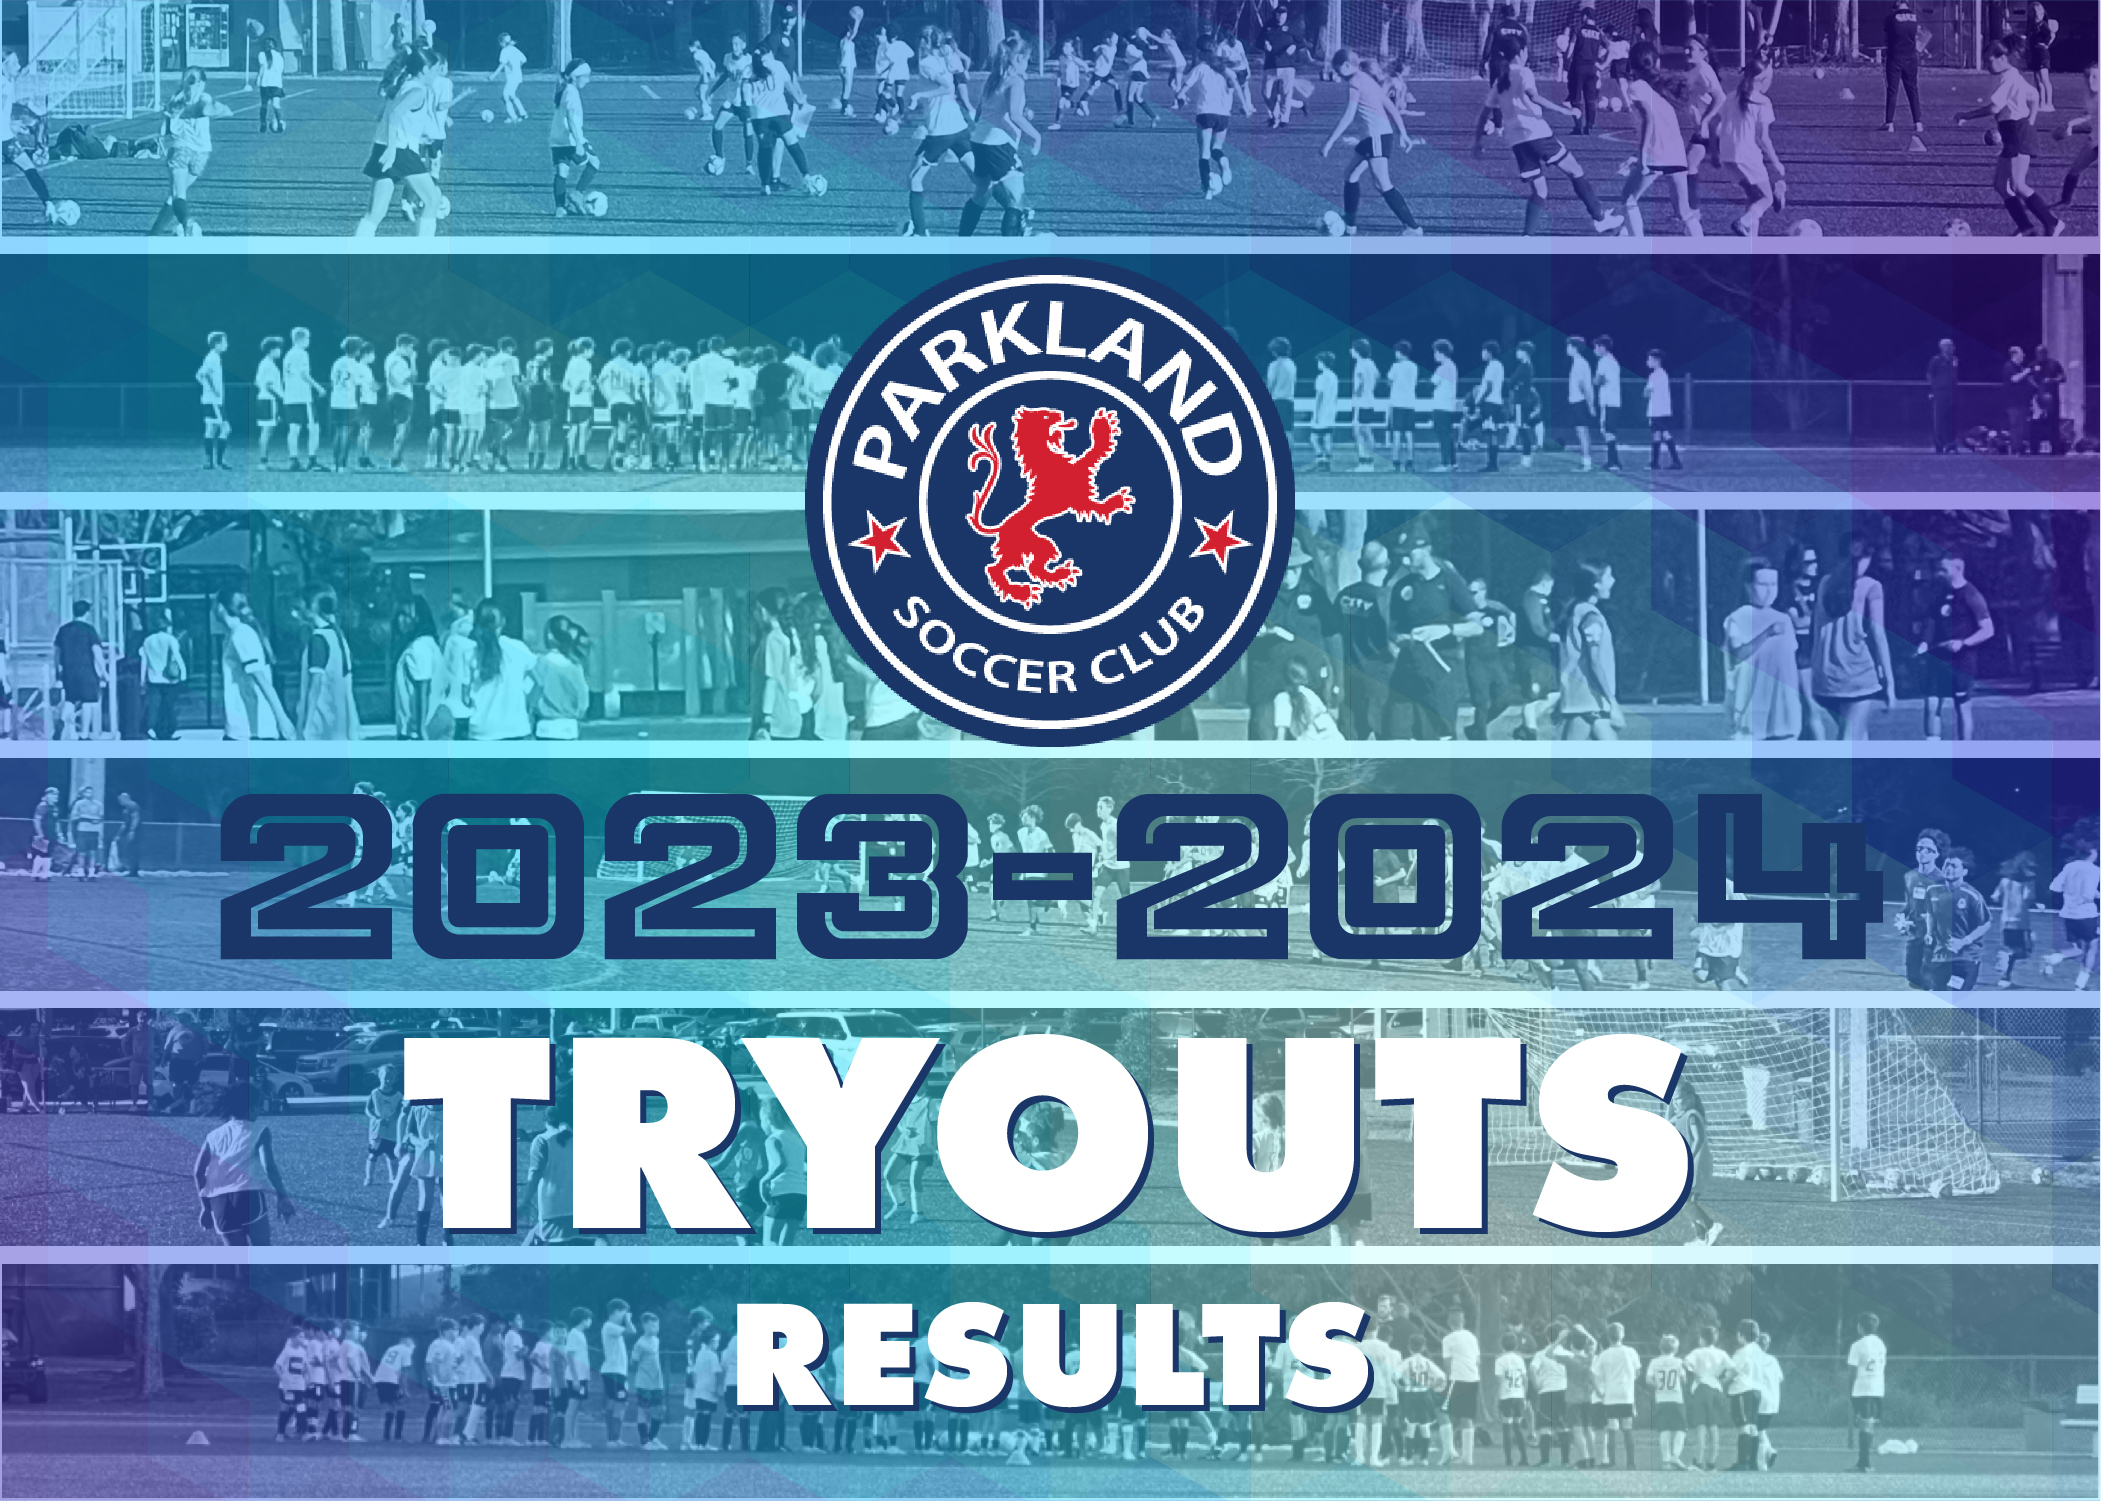 TRYOUTS RESULTS AND NEXT STEPS